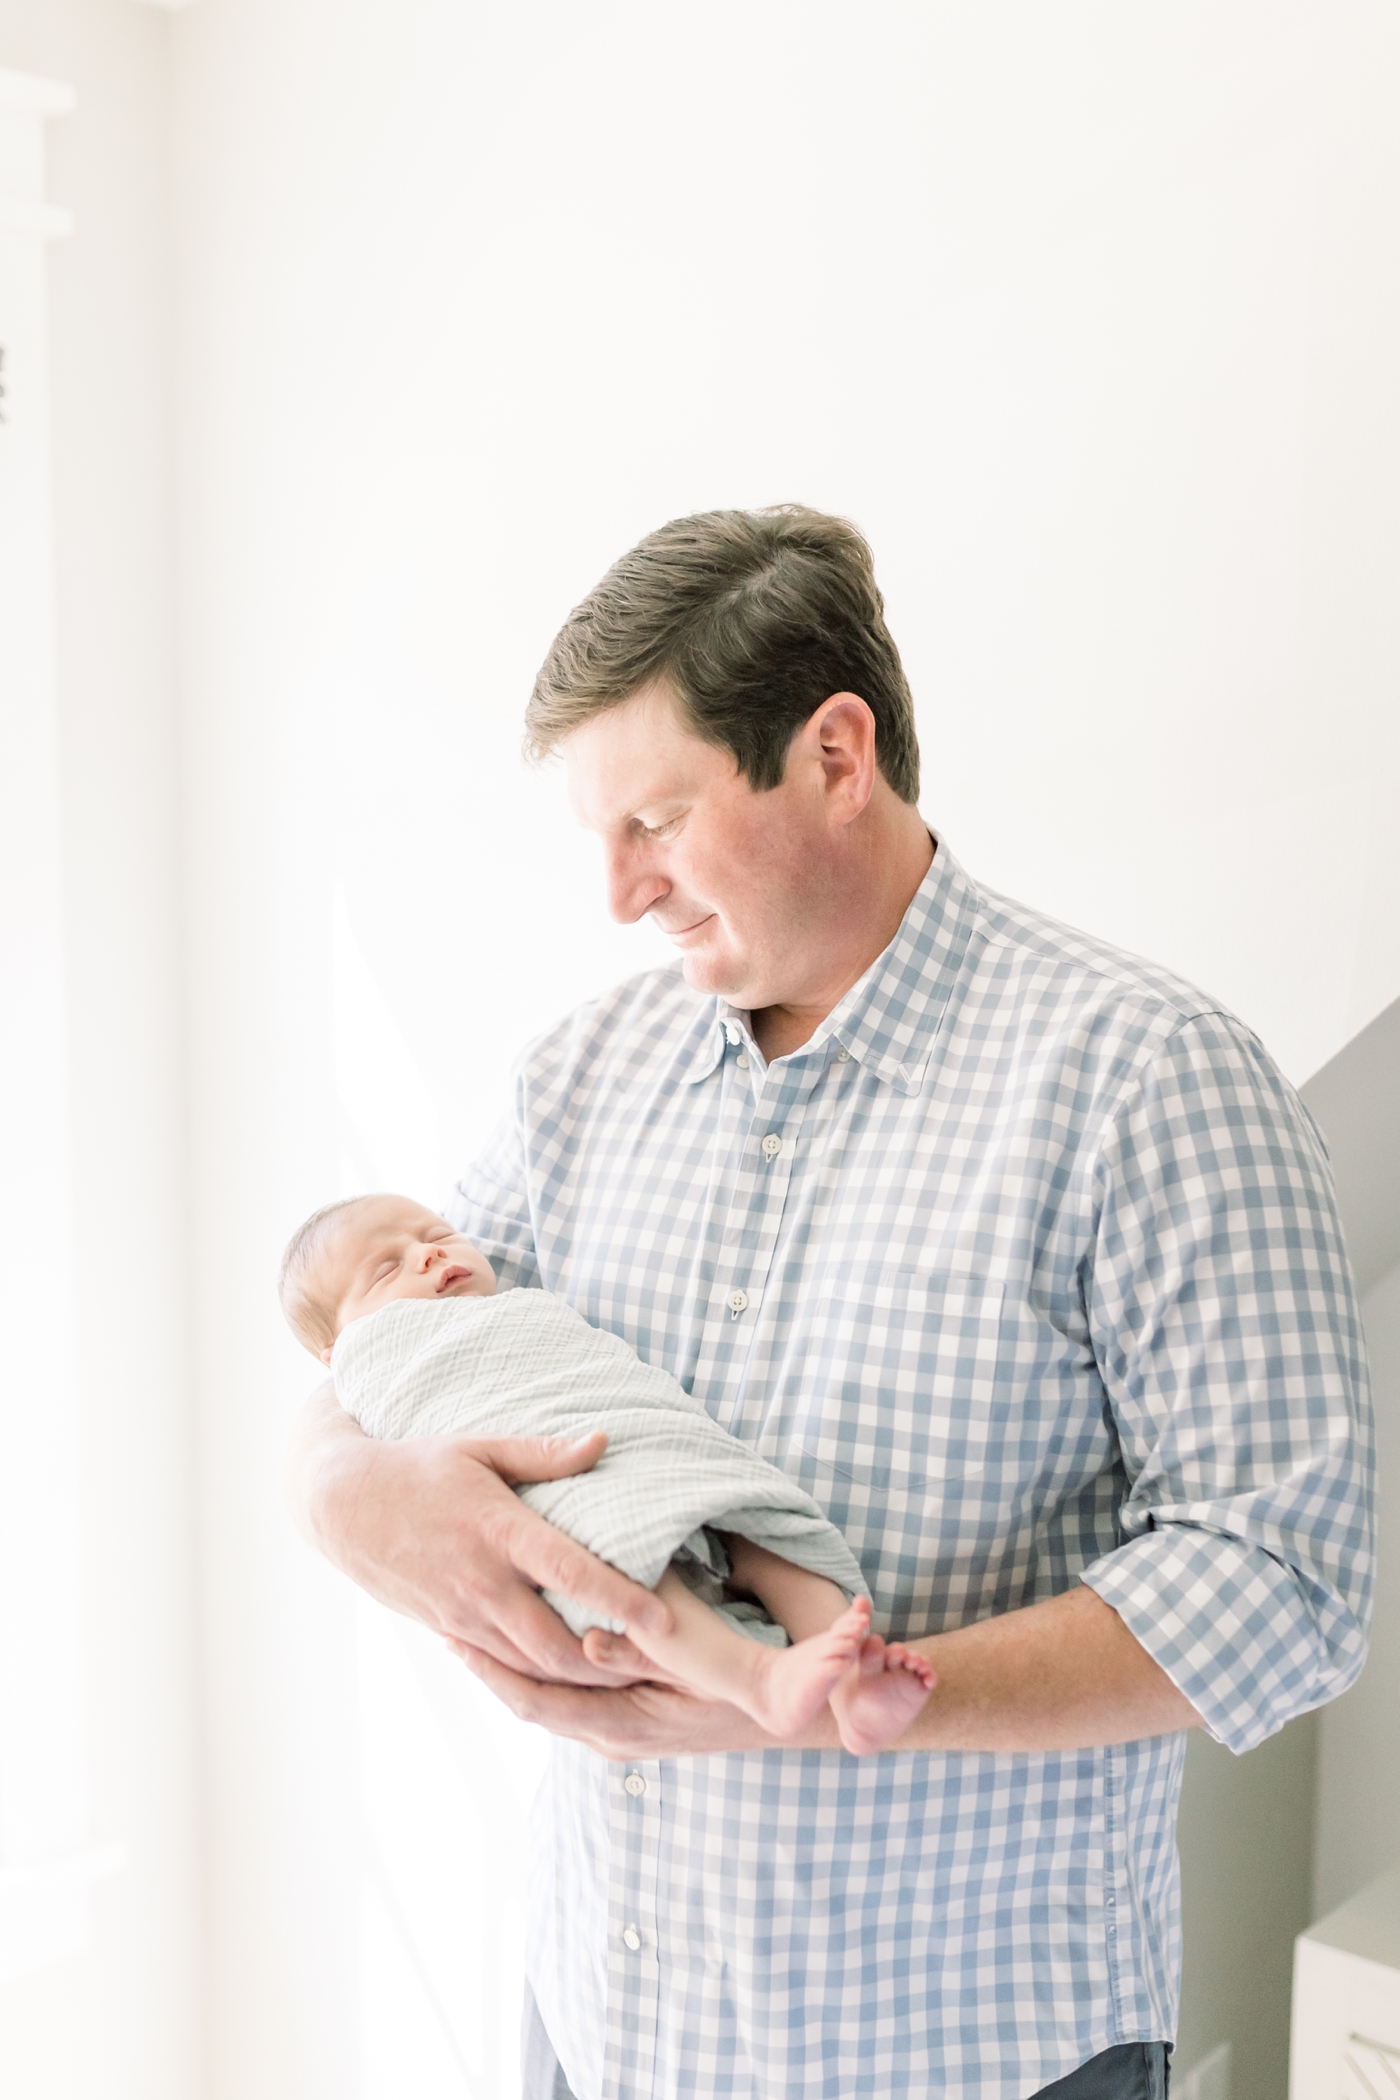 Dad holding his new baby during their in home newborn session | Photo by Caitlyn Motycka Photography.